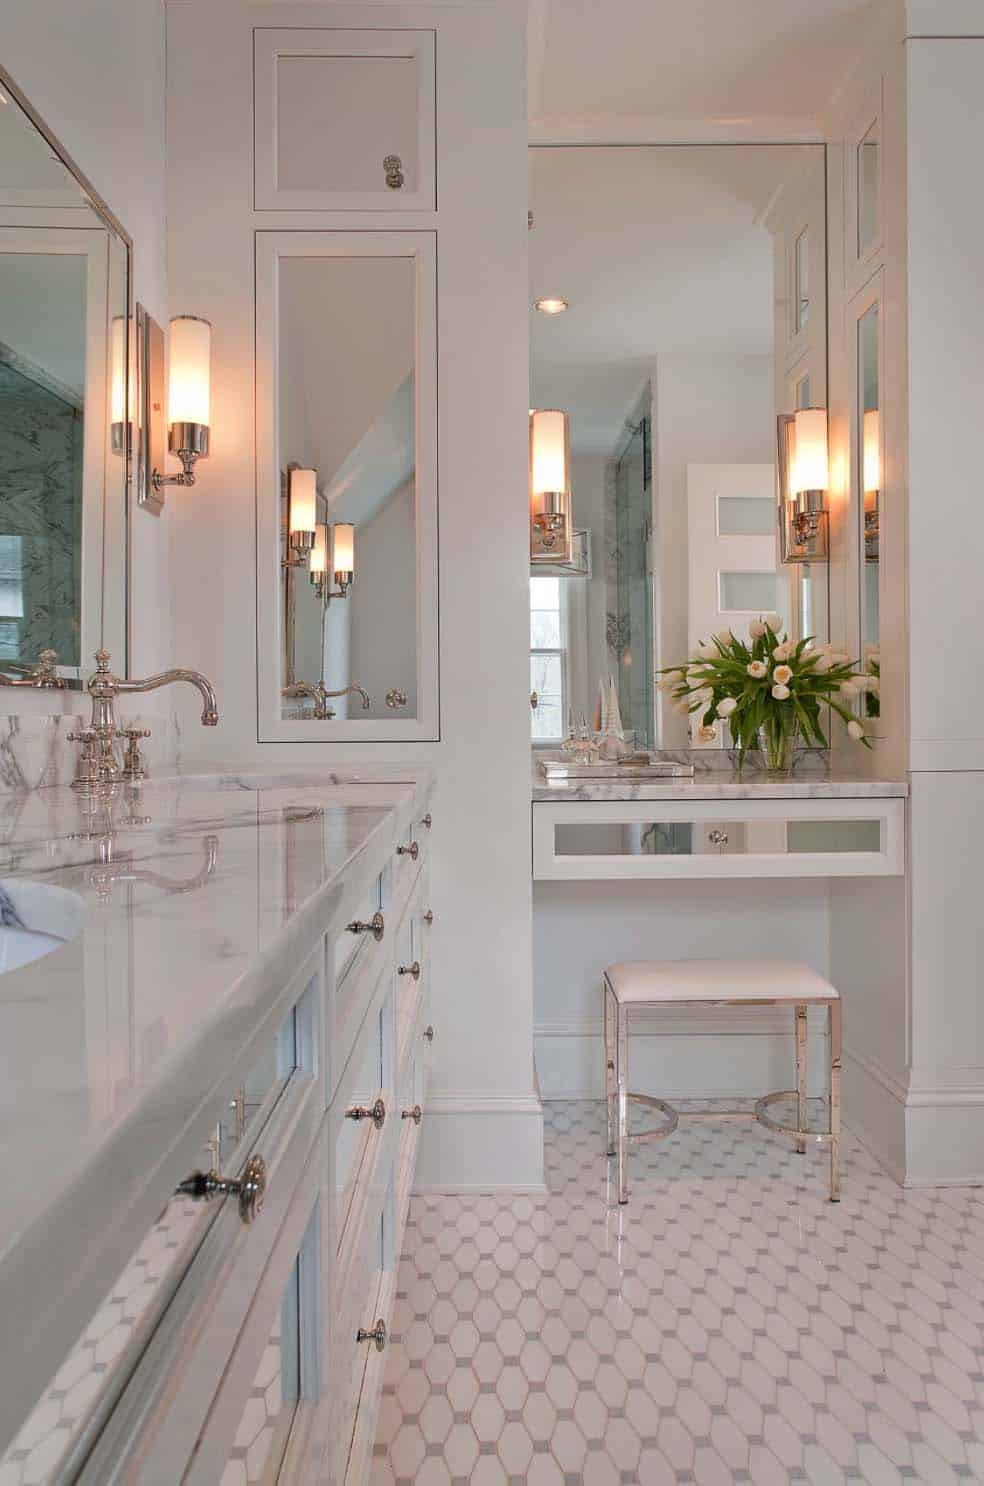 Traditional Bathroom Tile Ideas
 53 Most fabulous traditional style bathroom designs ever